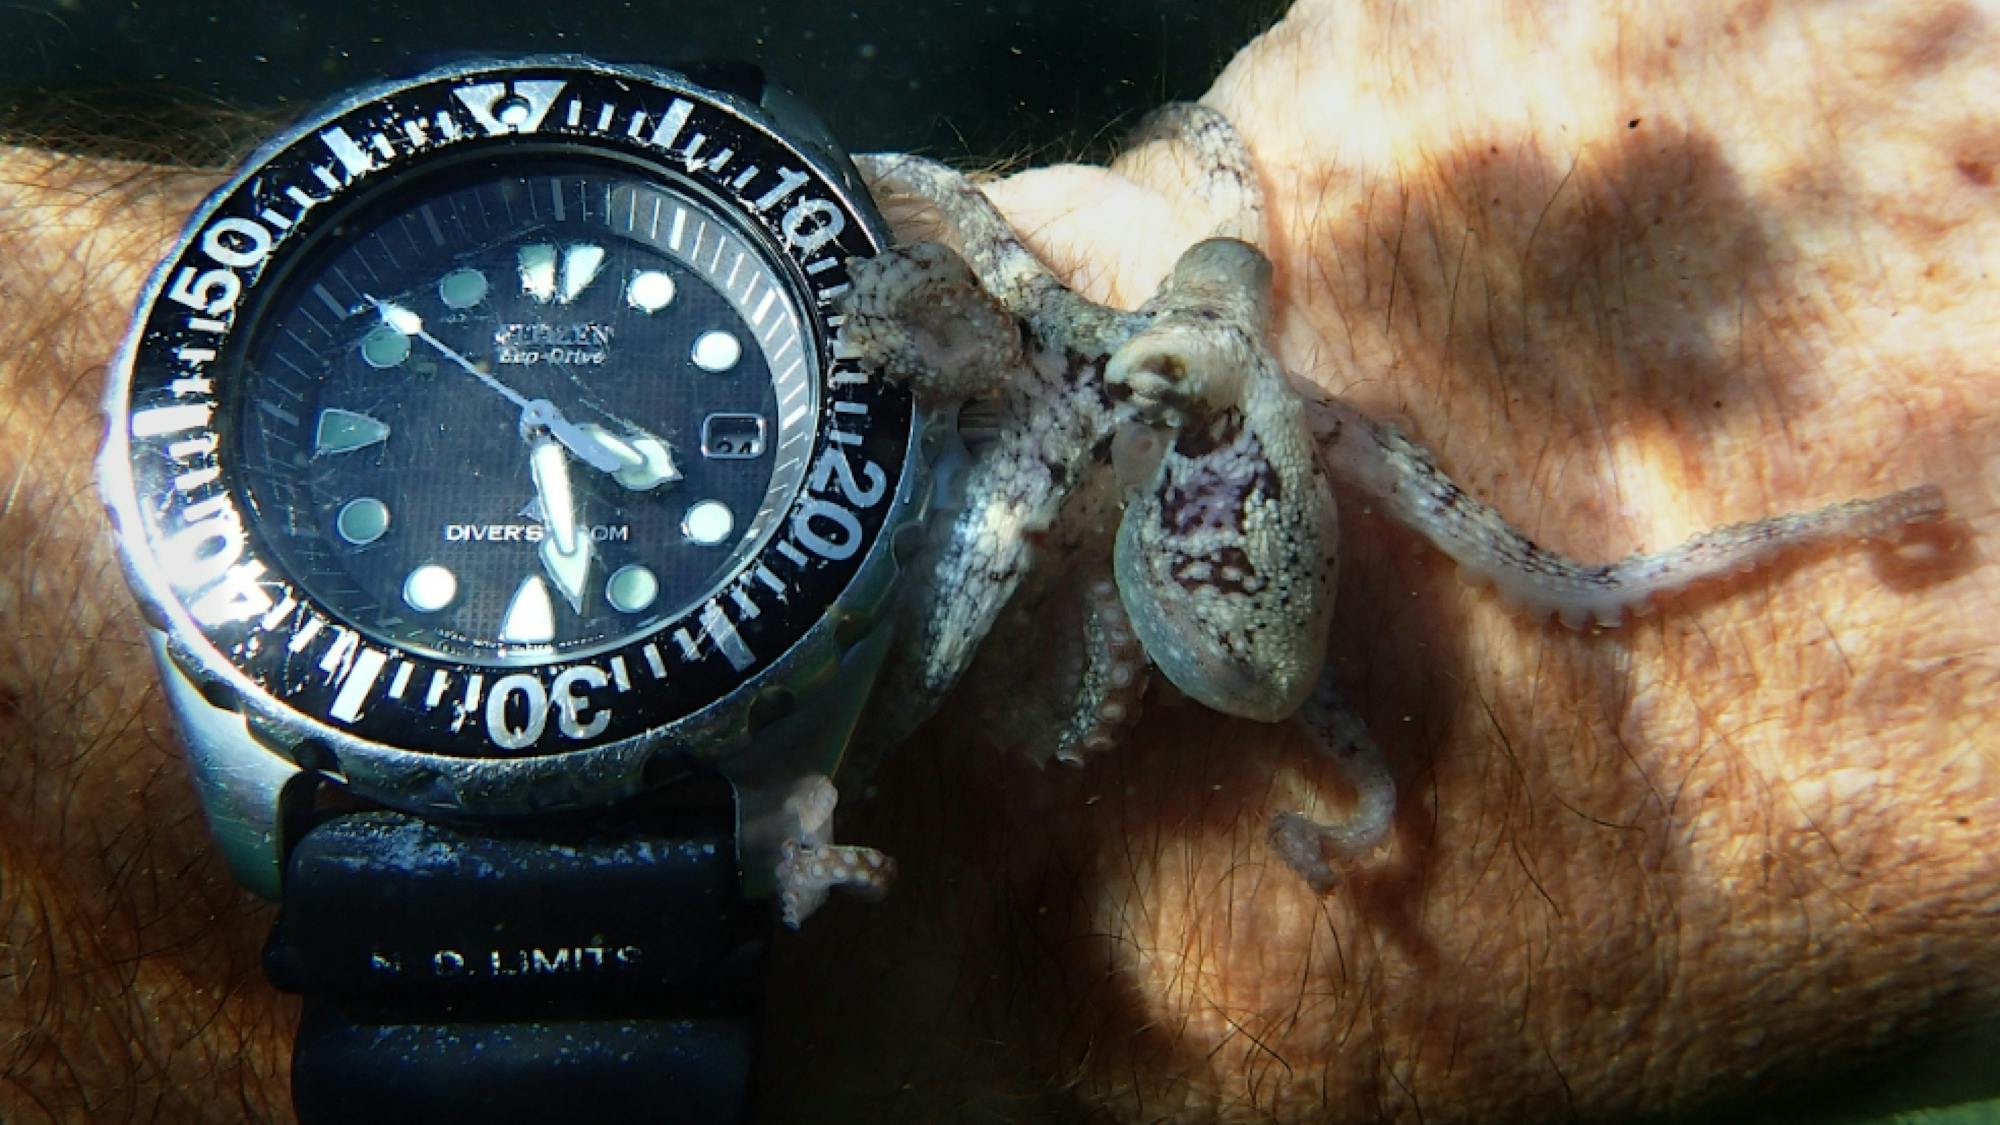 A tiny octopus is photographed next to a wristwatch for scale. The creature is about the size of the watch face. It begins to wrap its tentacles around the object, feeling the arm the watch is attached to at the same time.